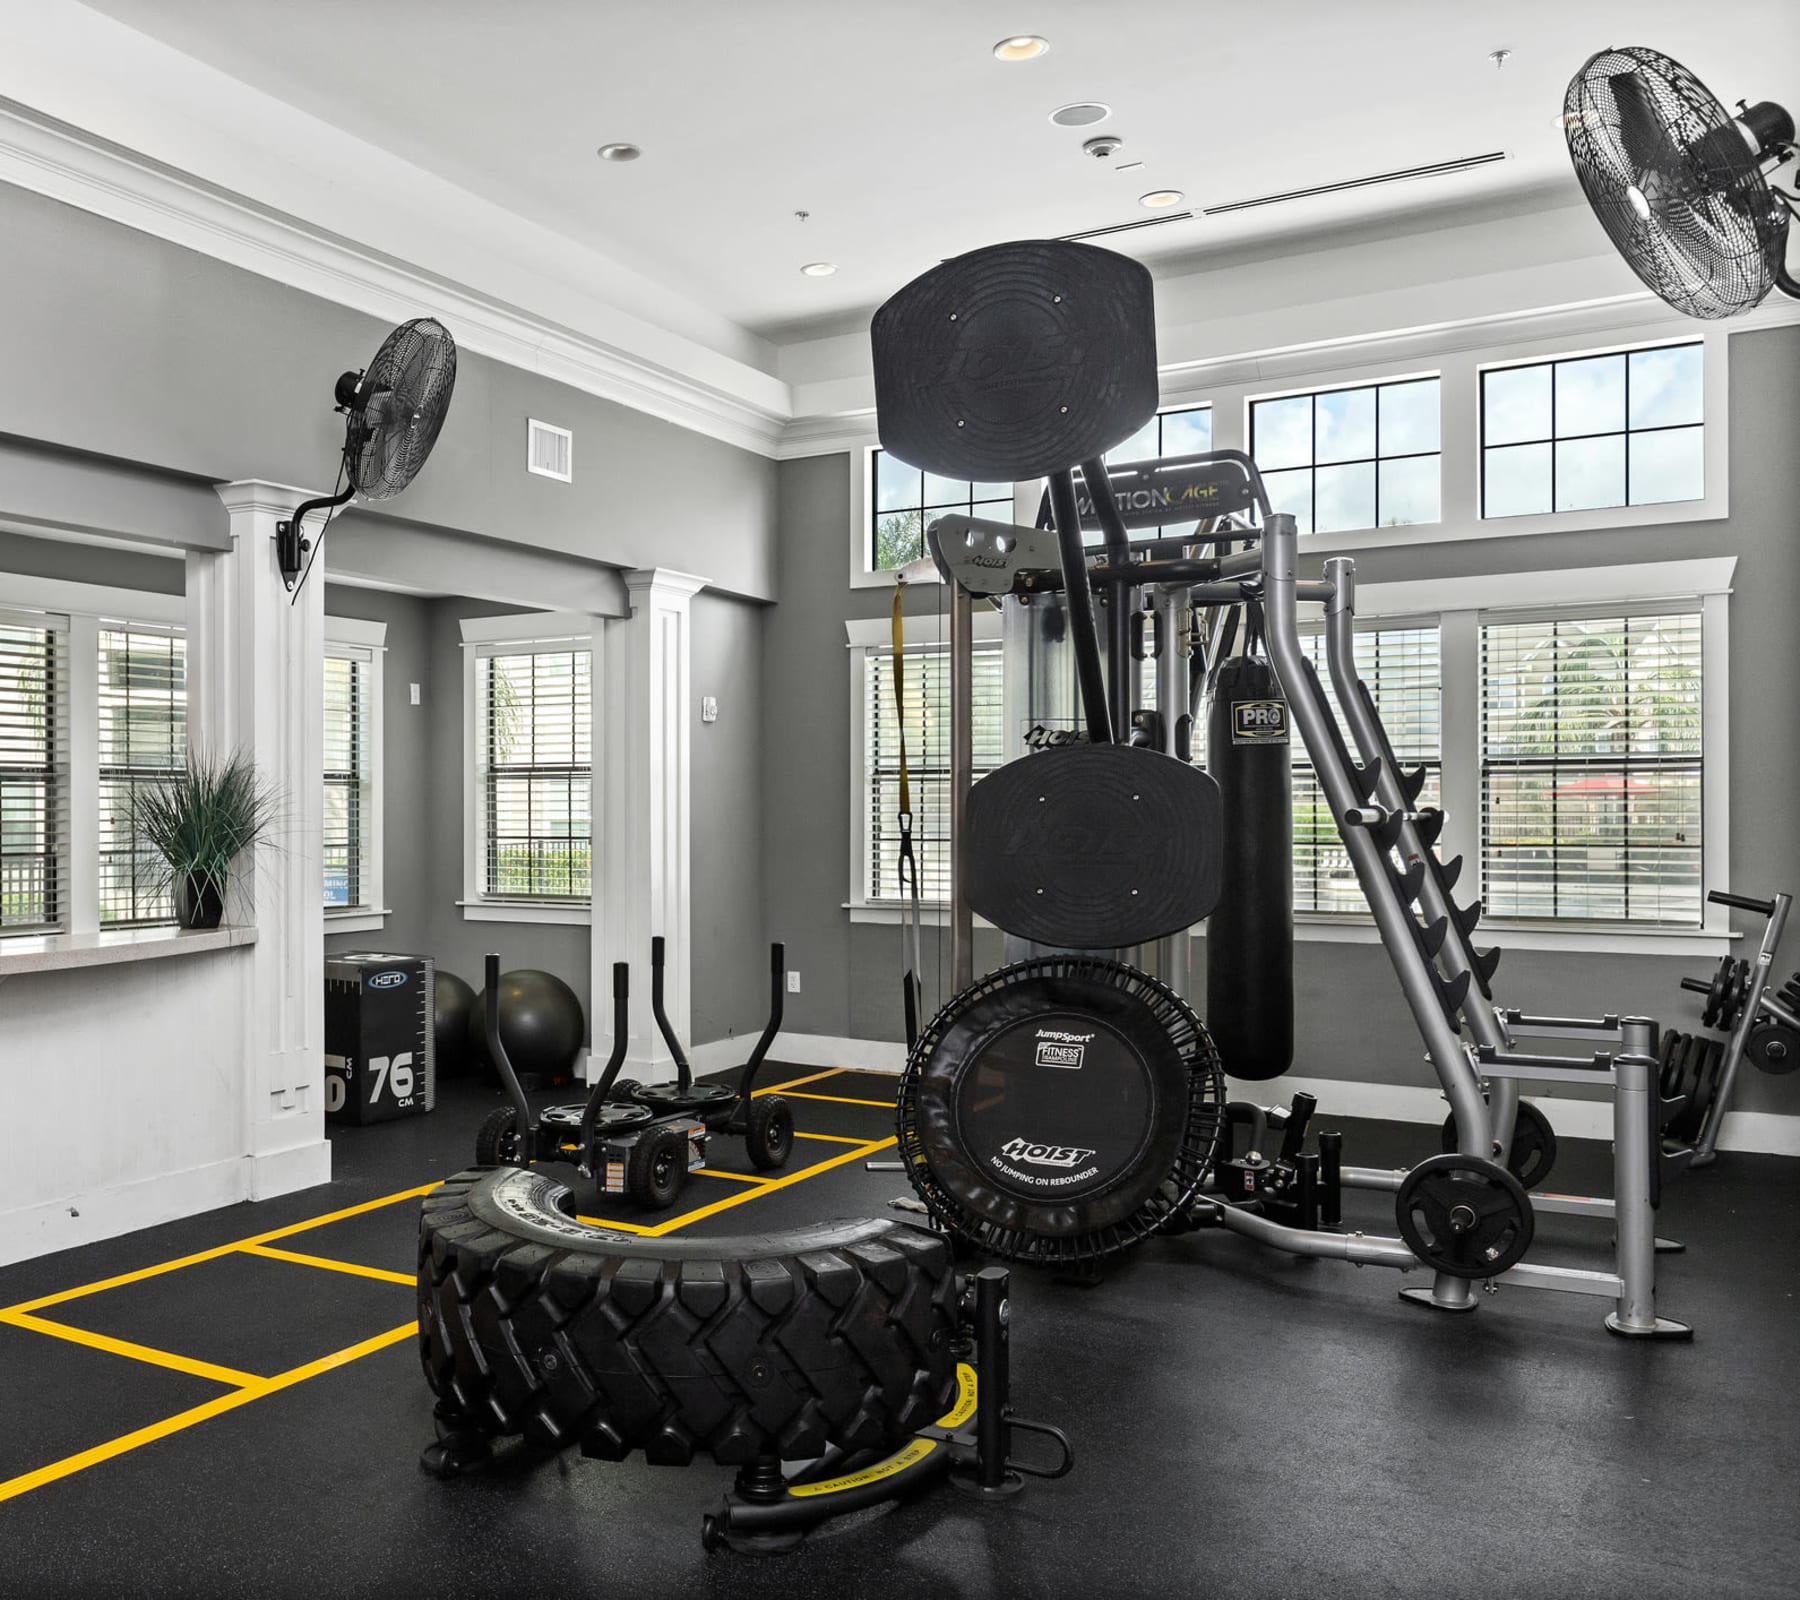 Very well-equipped onsite fitness center at Campus Quarters in Corpus Christi, Texas